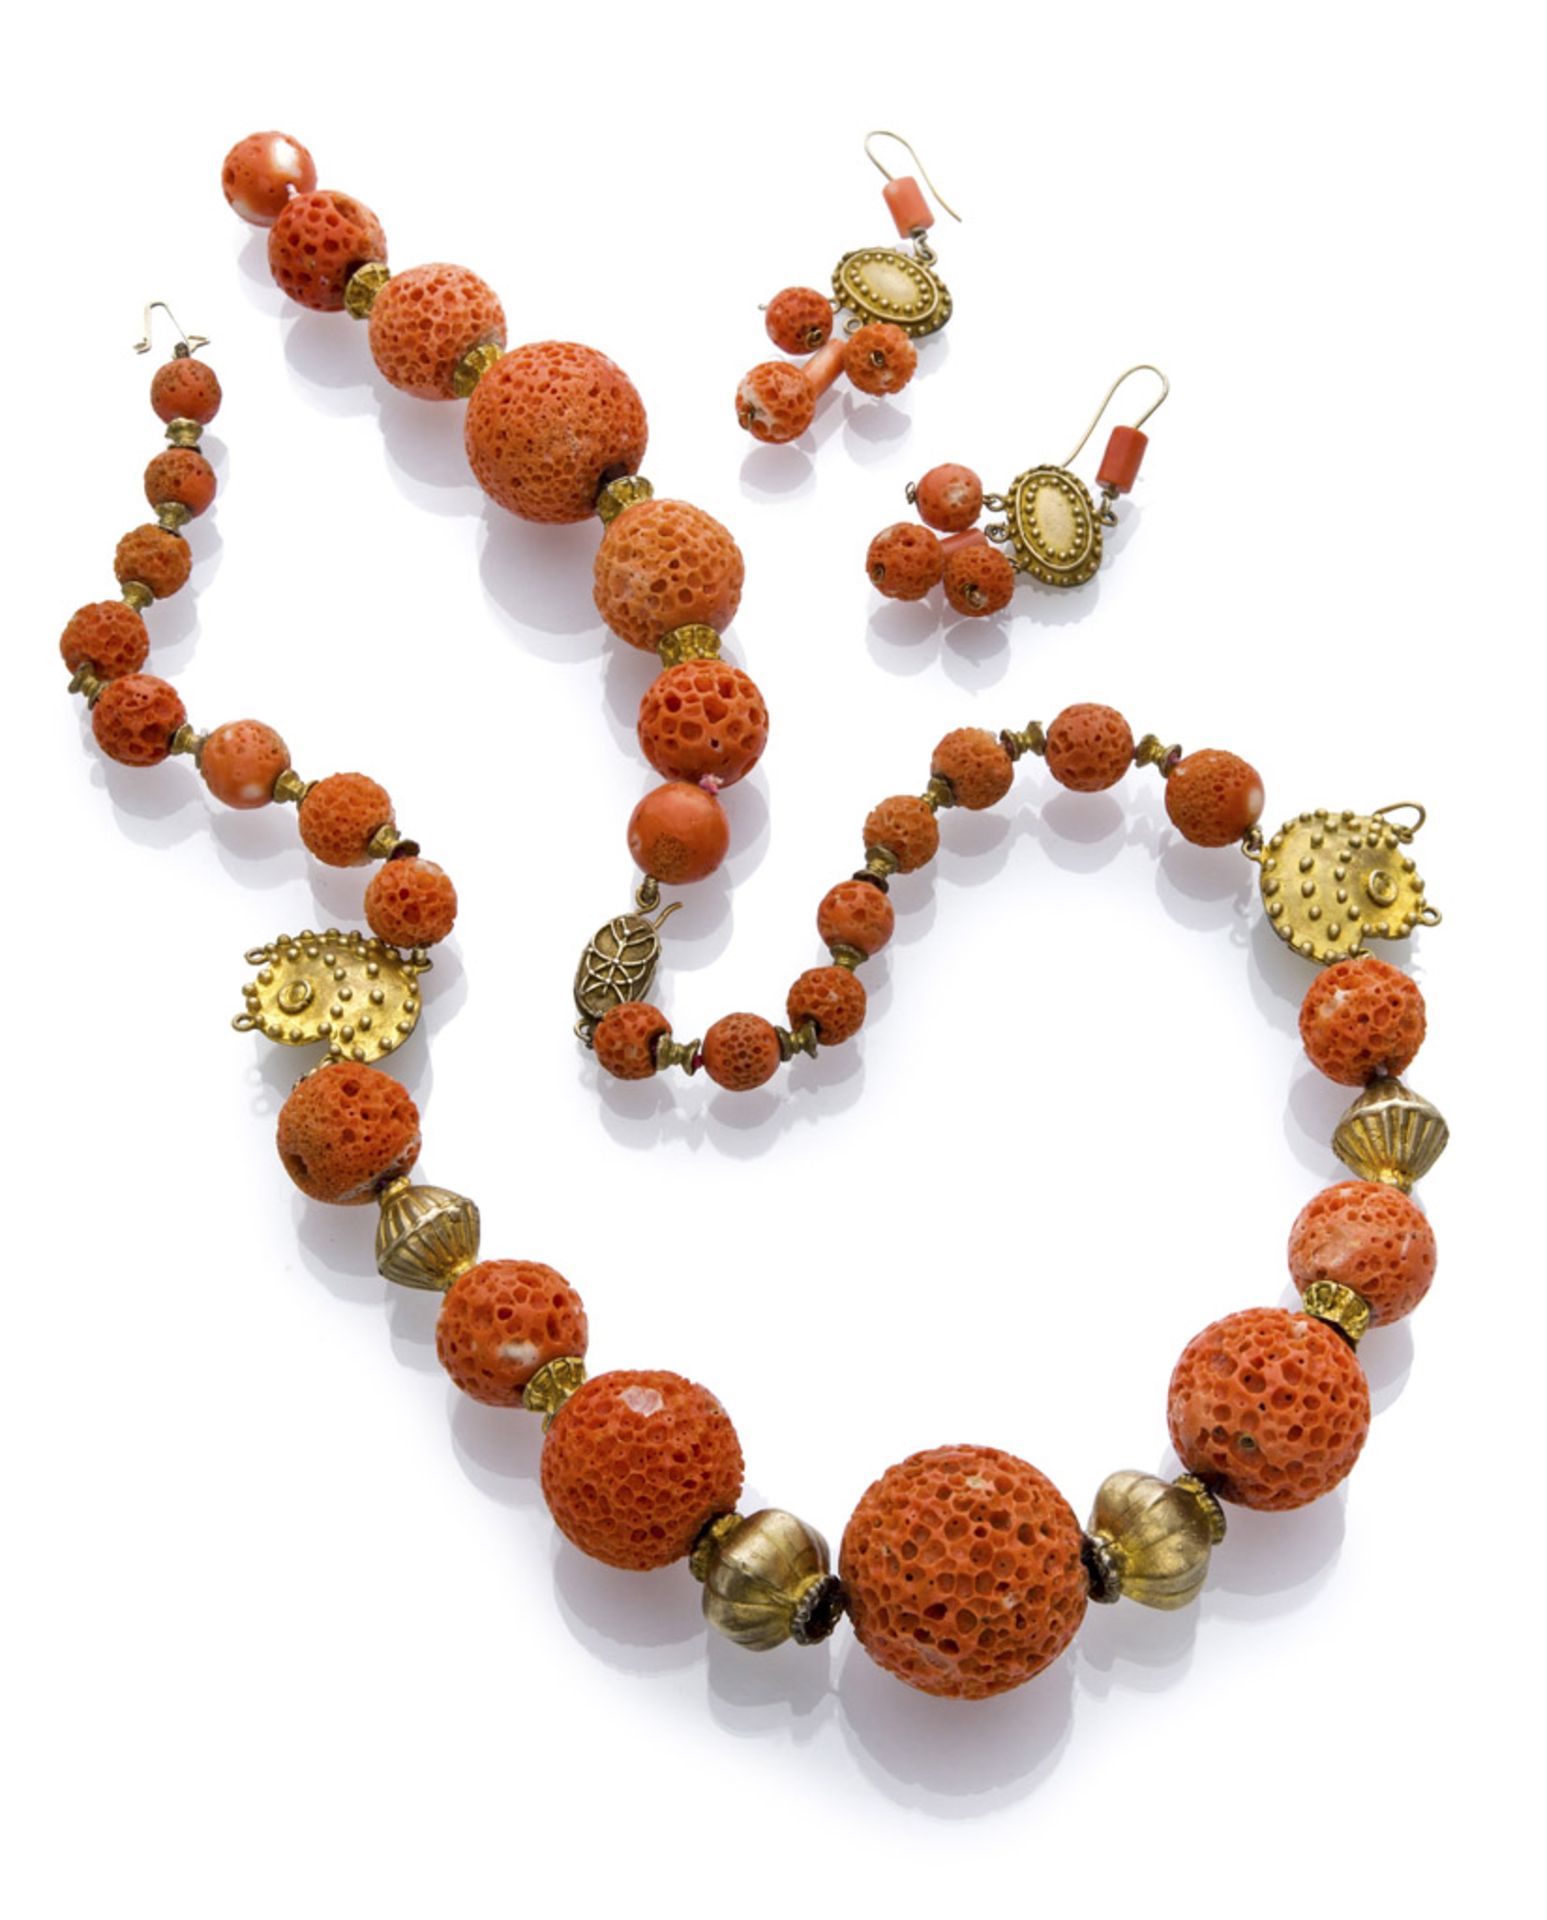 PARURE OF NECKLACE AND EARRINGS with spheres in spongy coral alternated by elements in gilded metal.